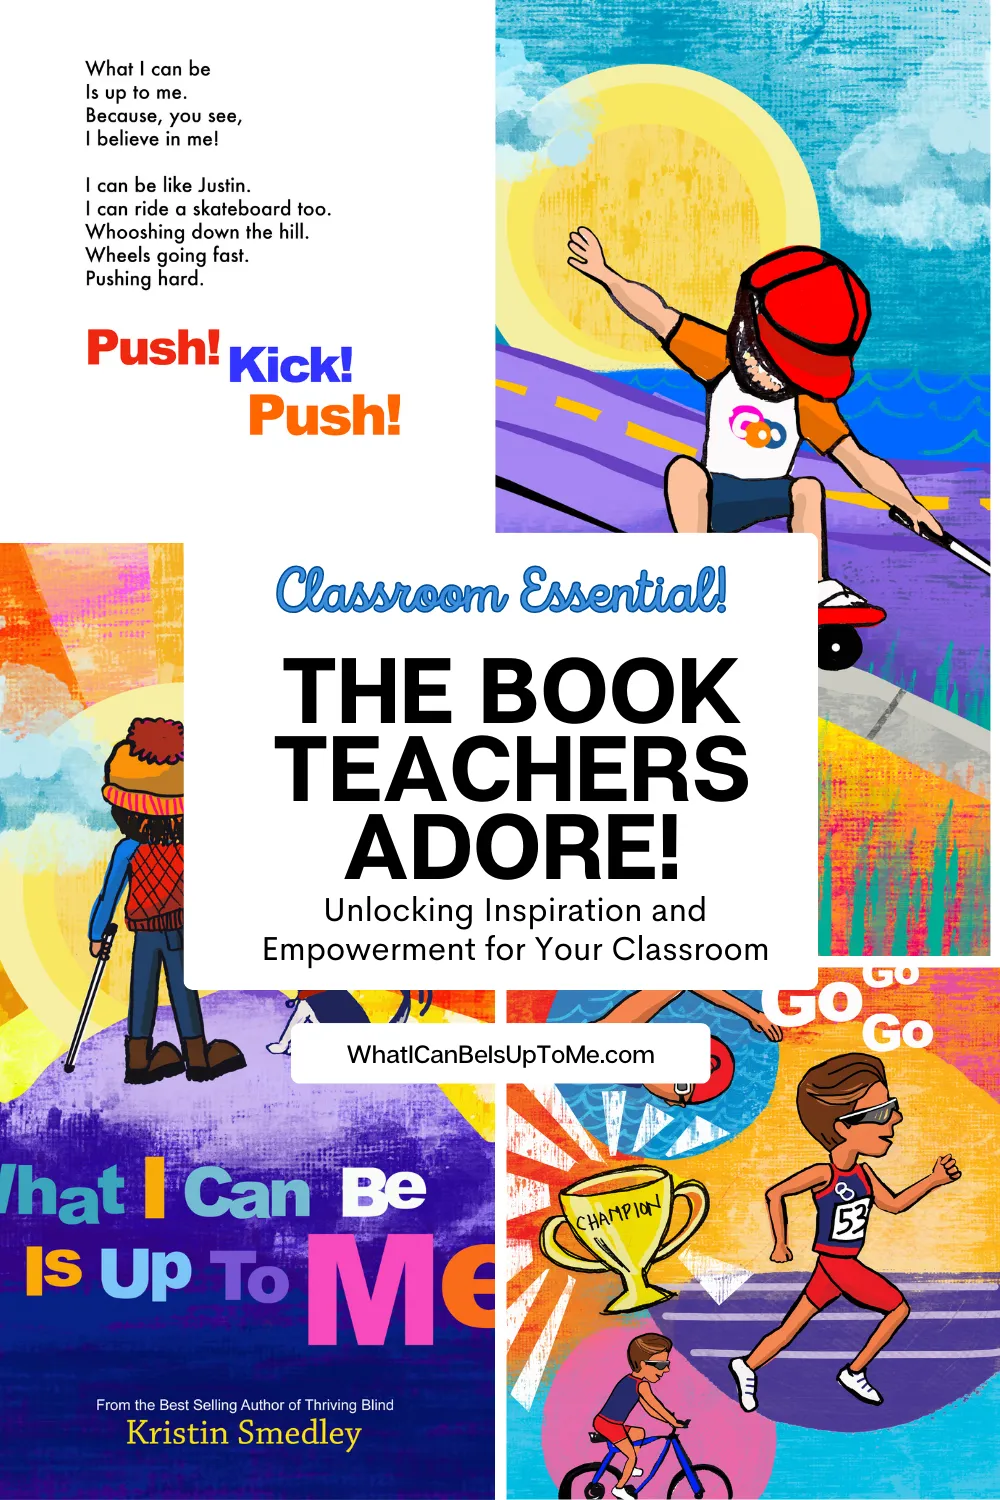 images from the book with text Classroom Essential: The bok techers adore